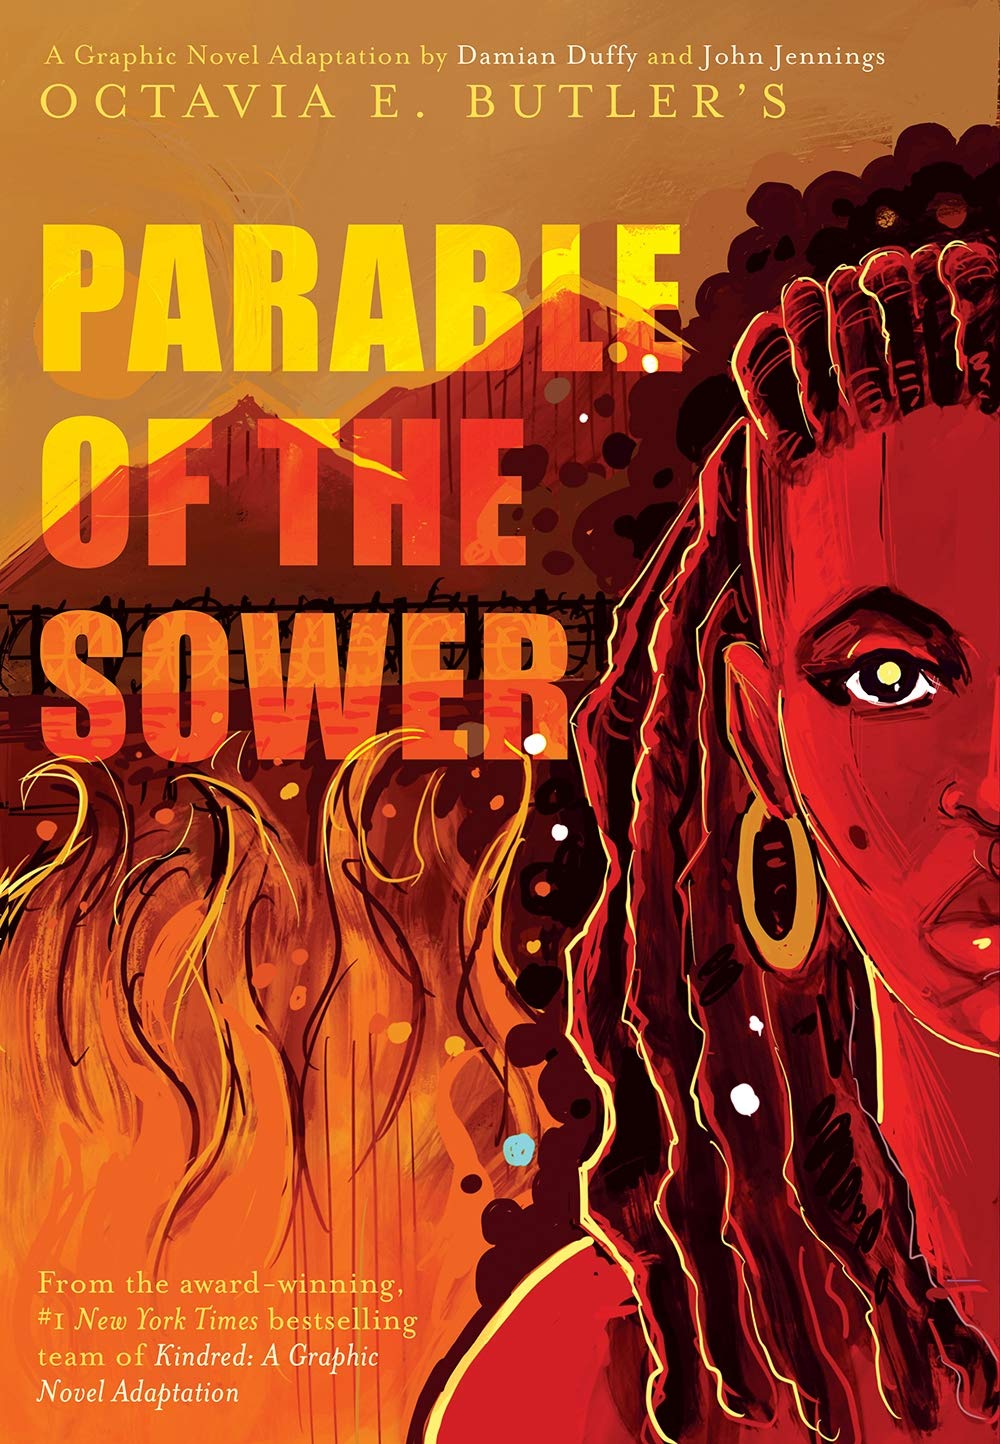 Parable of the Sower // Graphic Novel